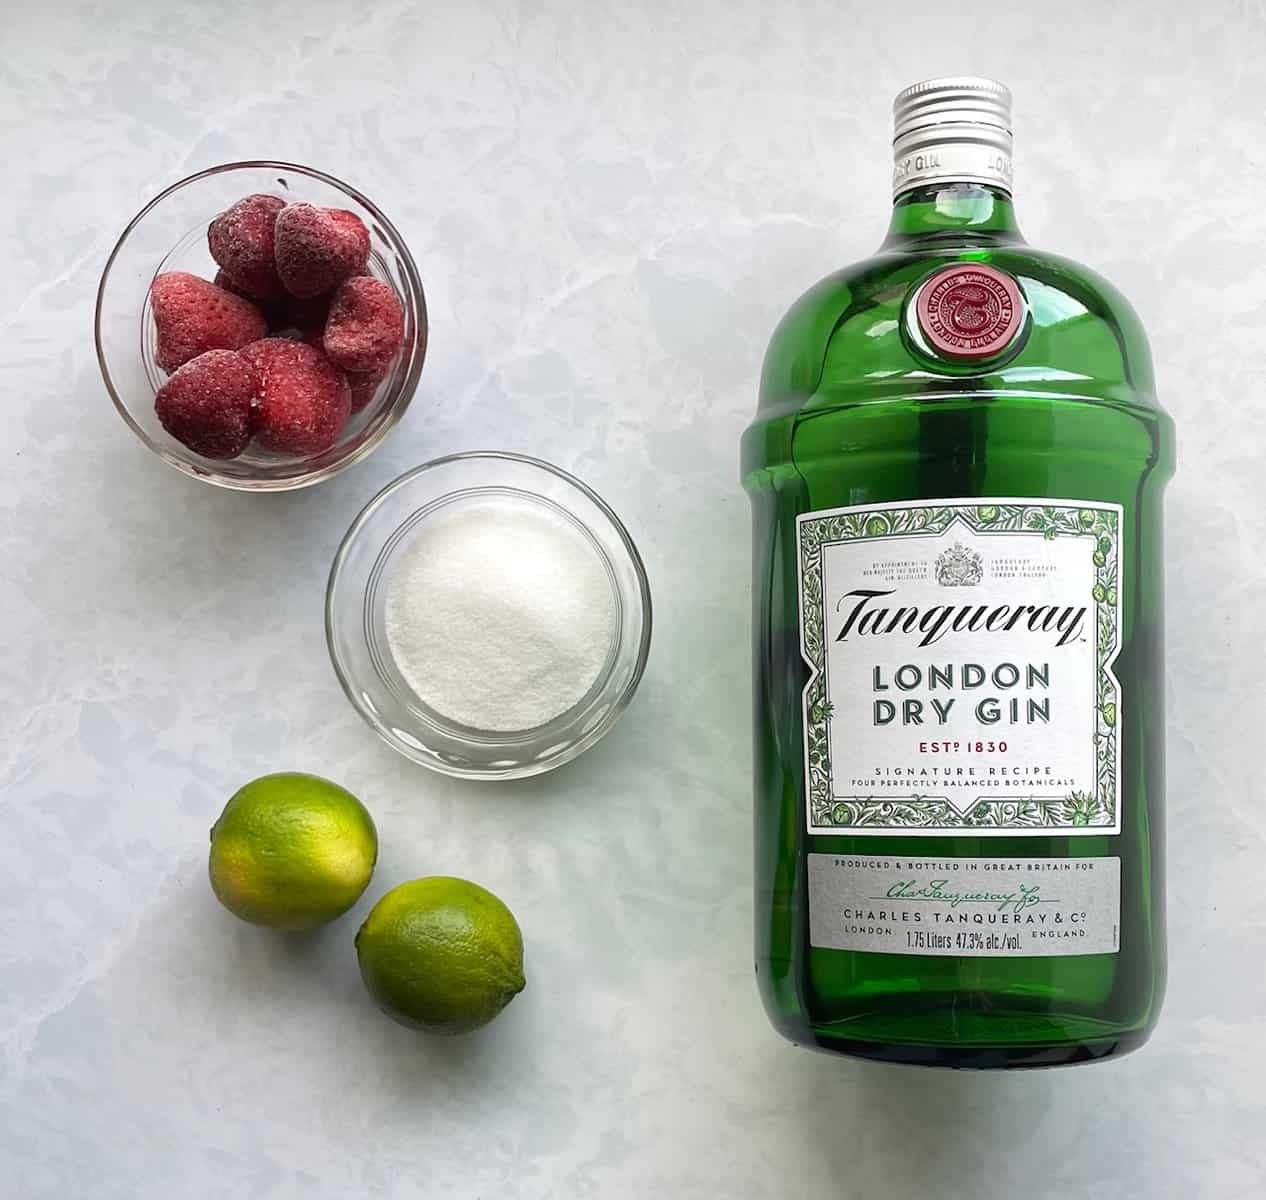 strawberries, sugar, limes, and bottle of Tanqueray London dry gin on a countertop.